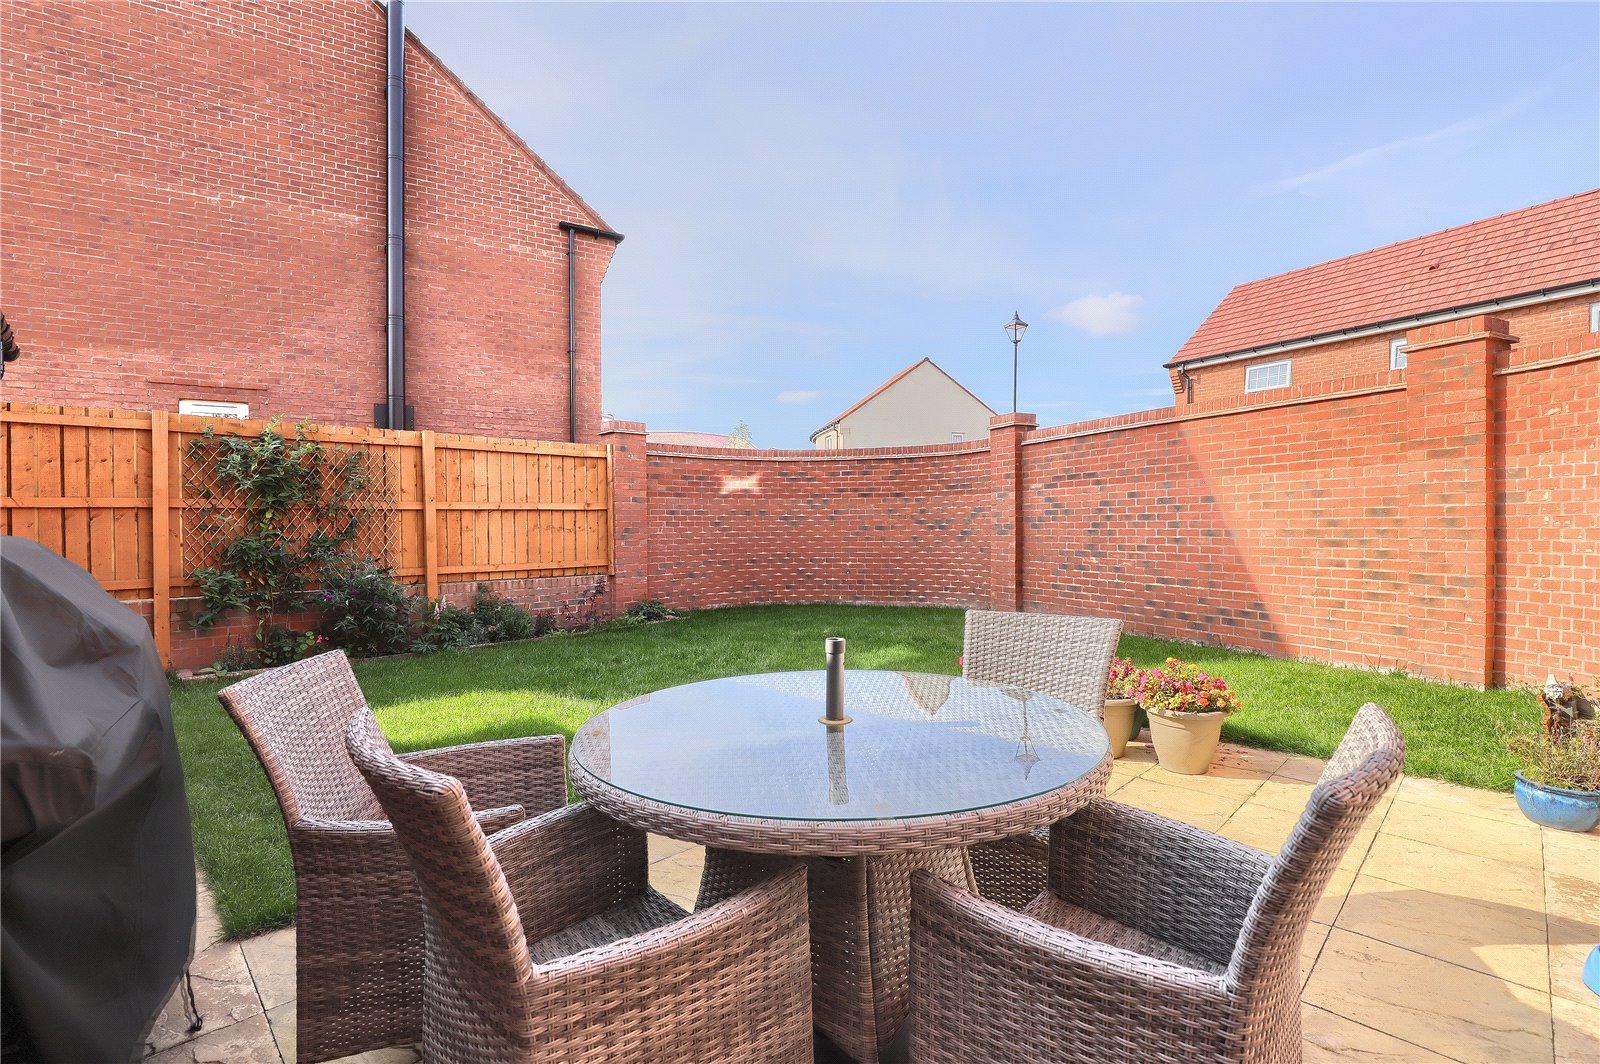 3 bed house for sale in Ayton Meadows, Nunthorpe 1